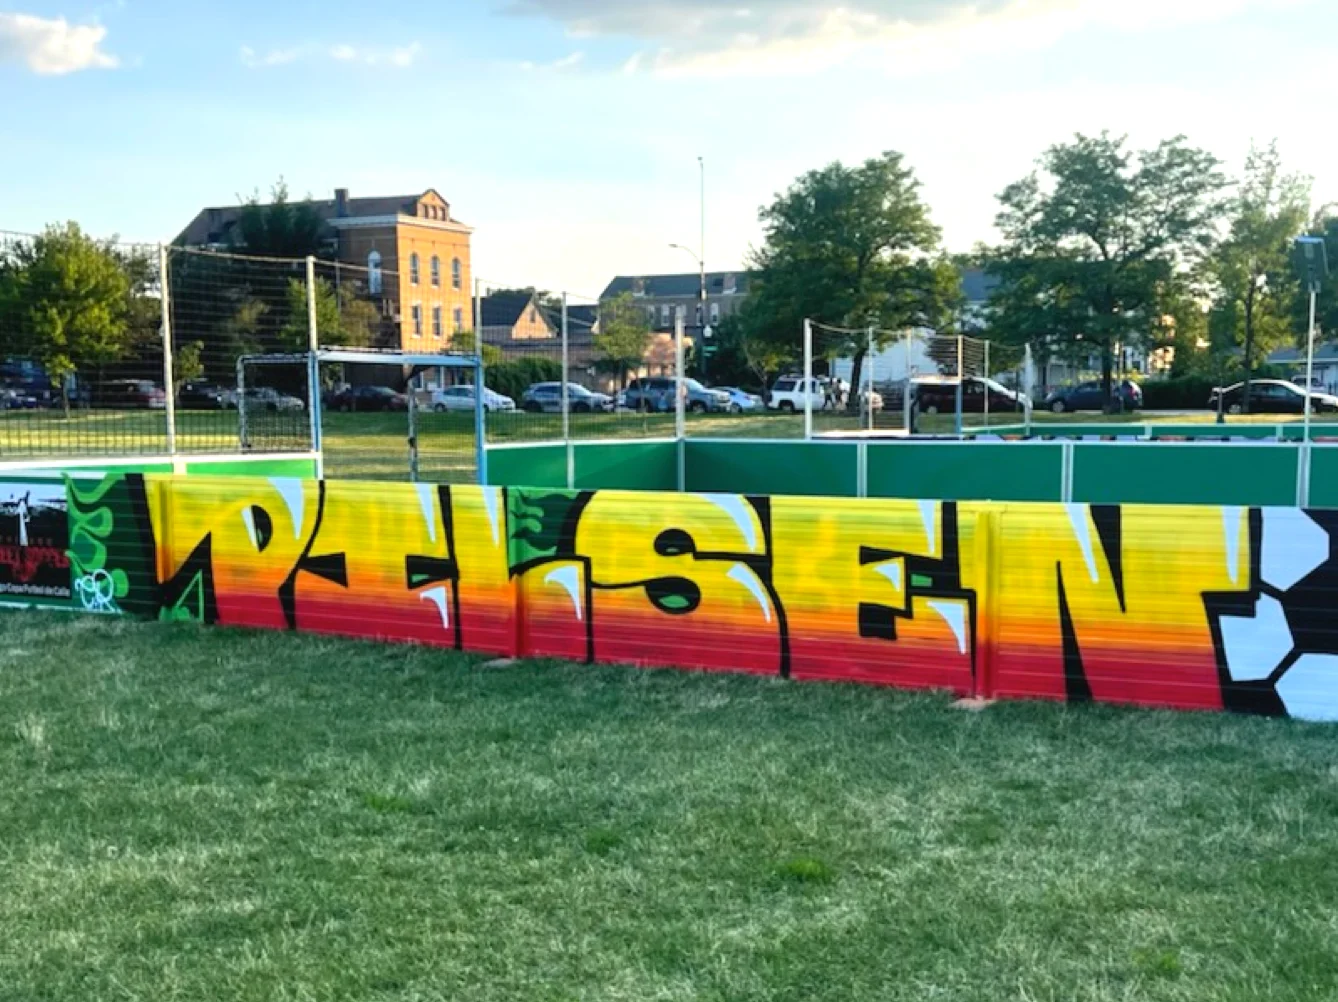 Soccer pitch with spray painted urban art